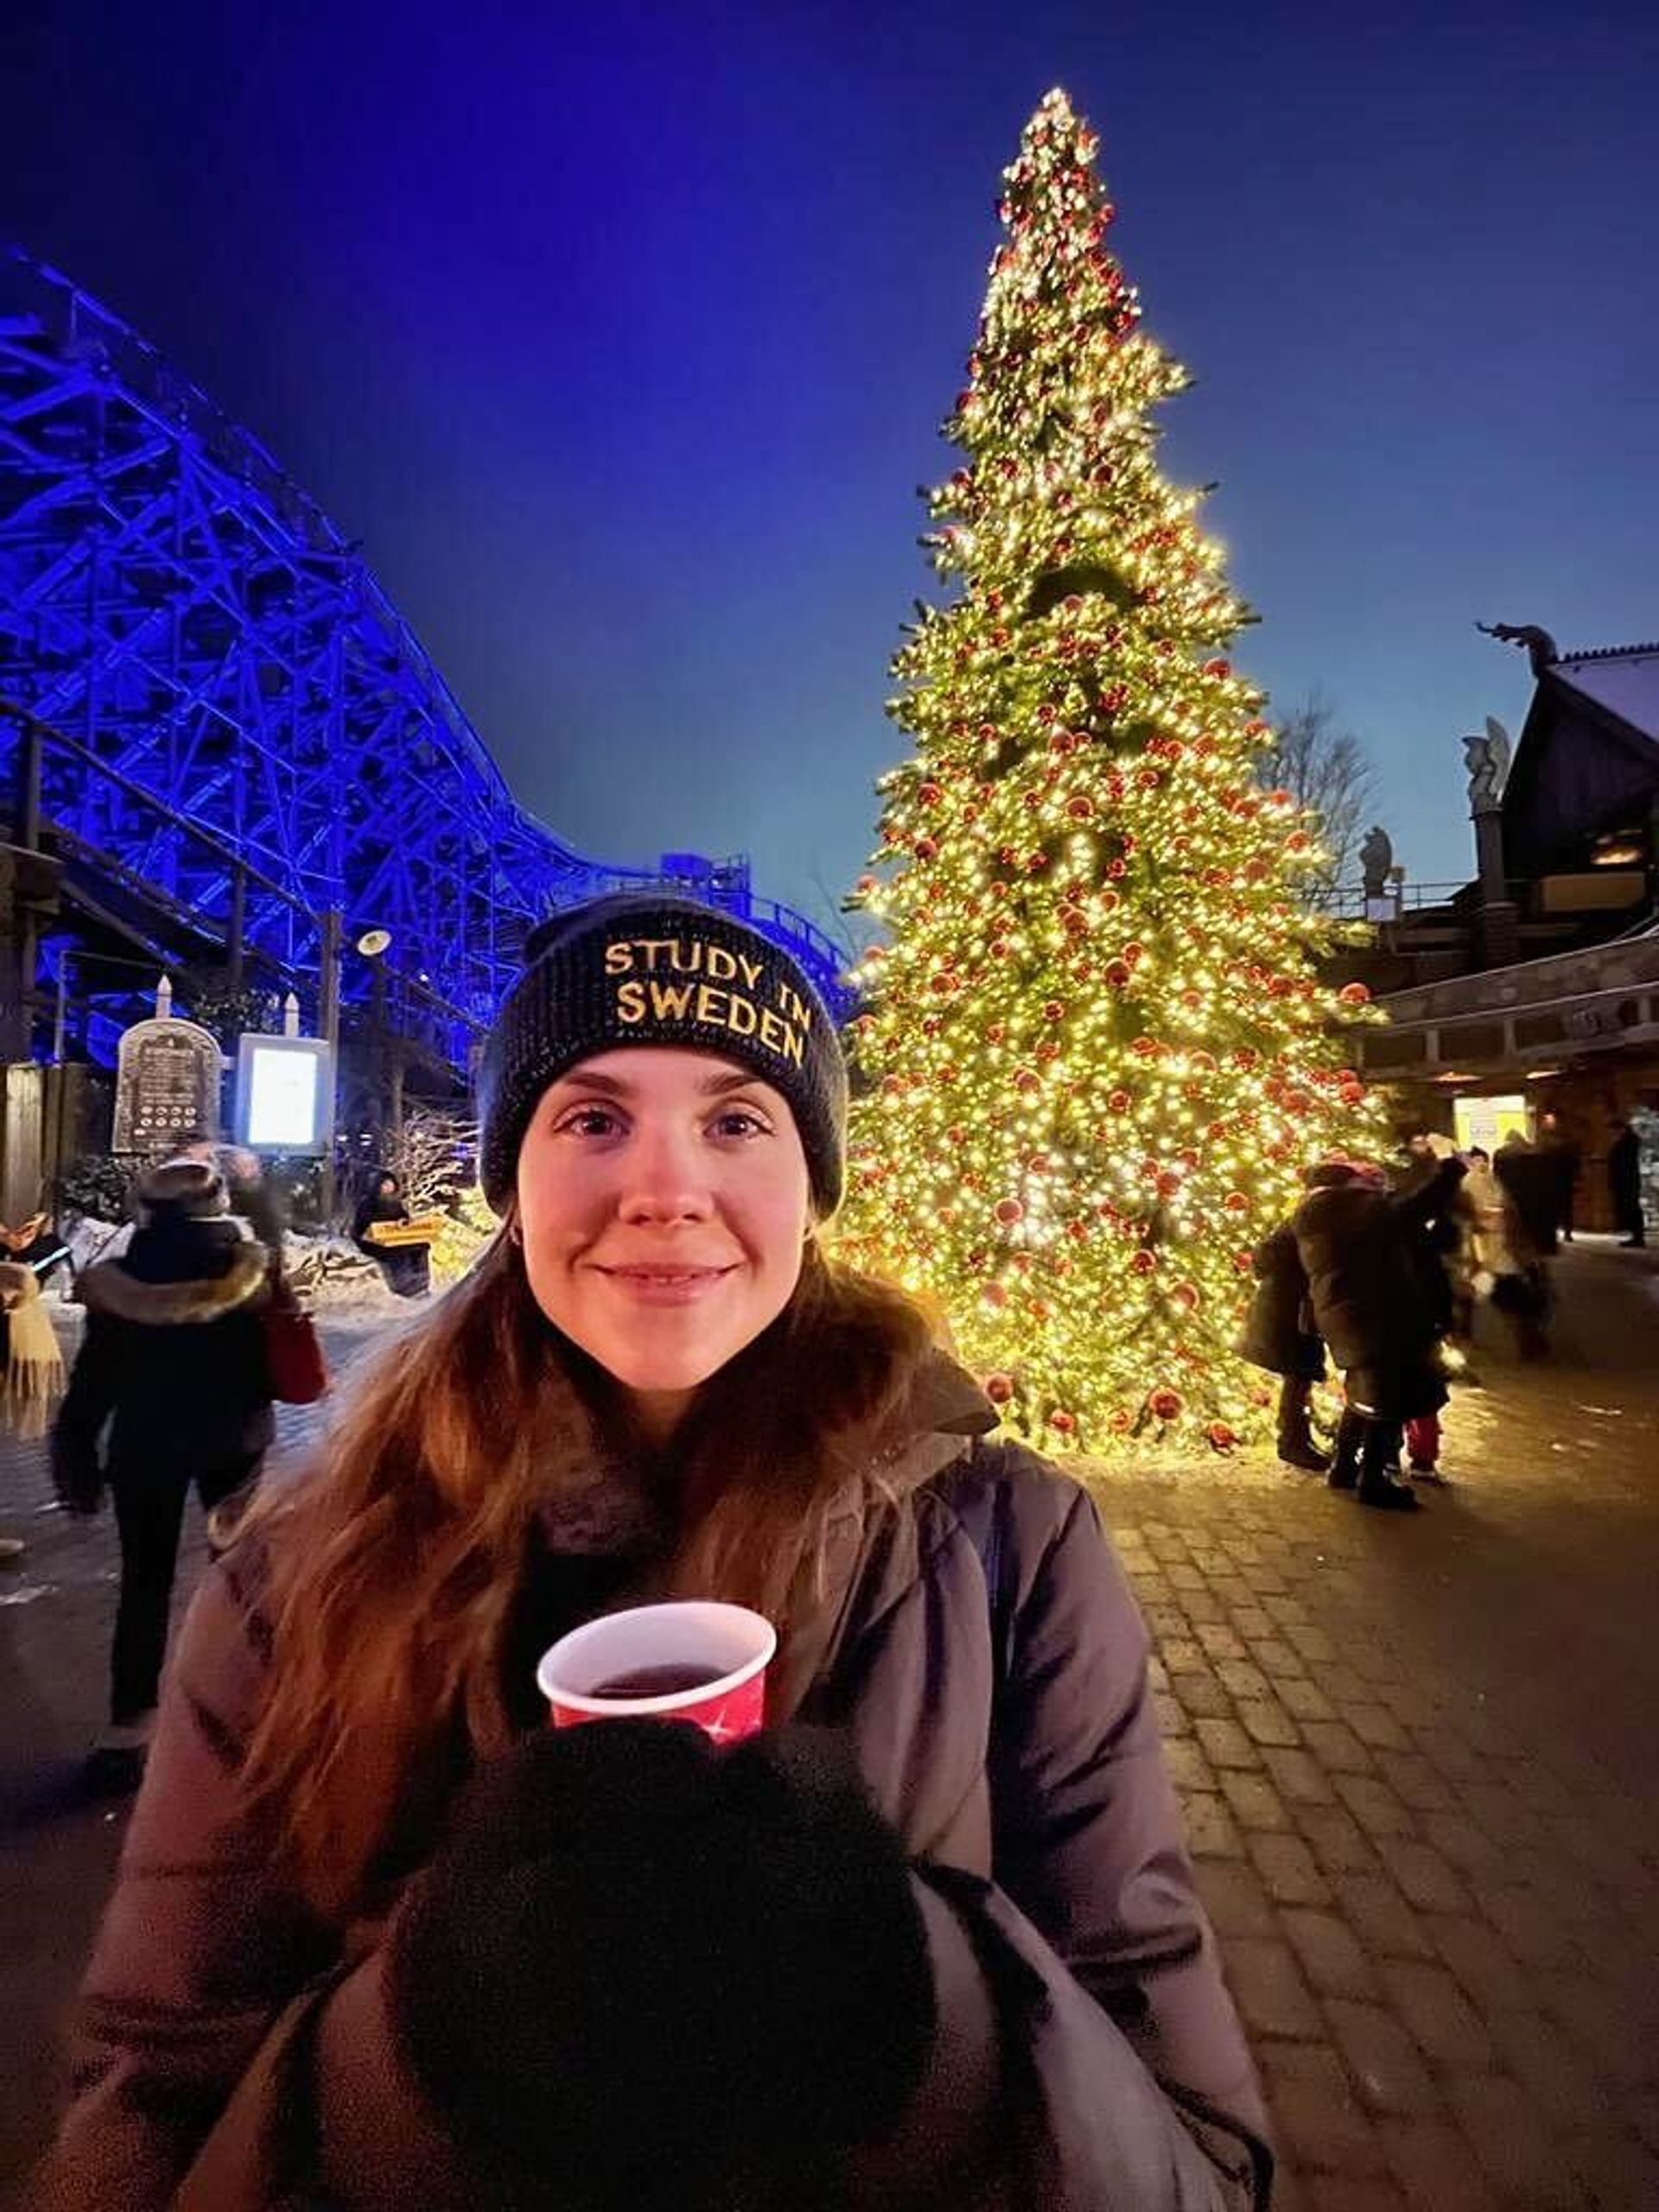 A woman posing in front of a Christmas tree at Liseberg park.